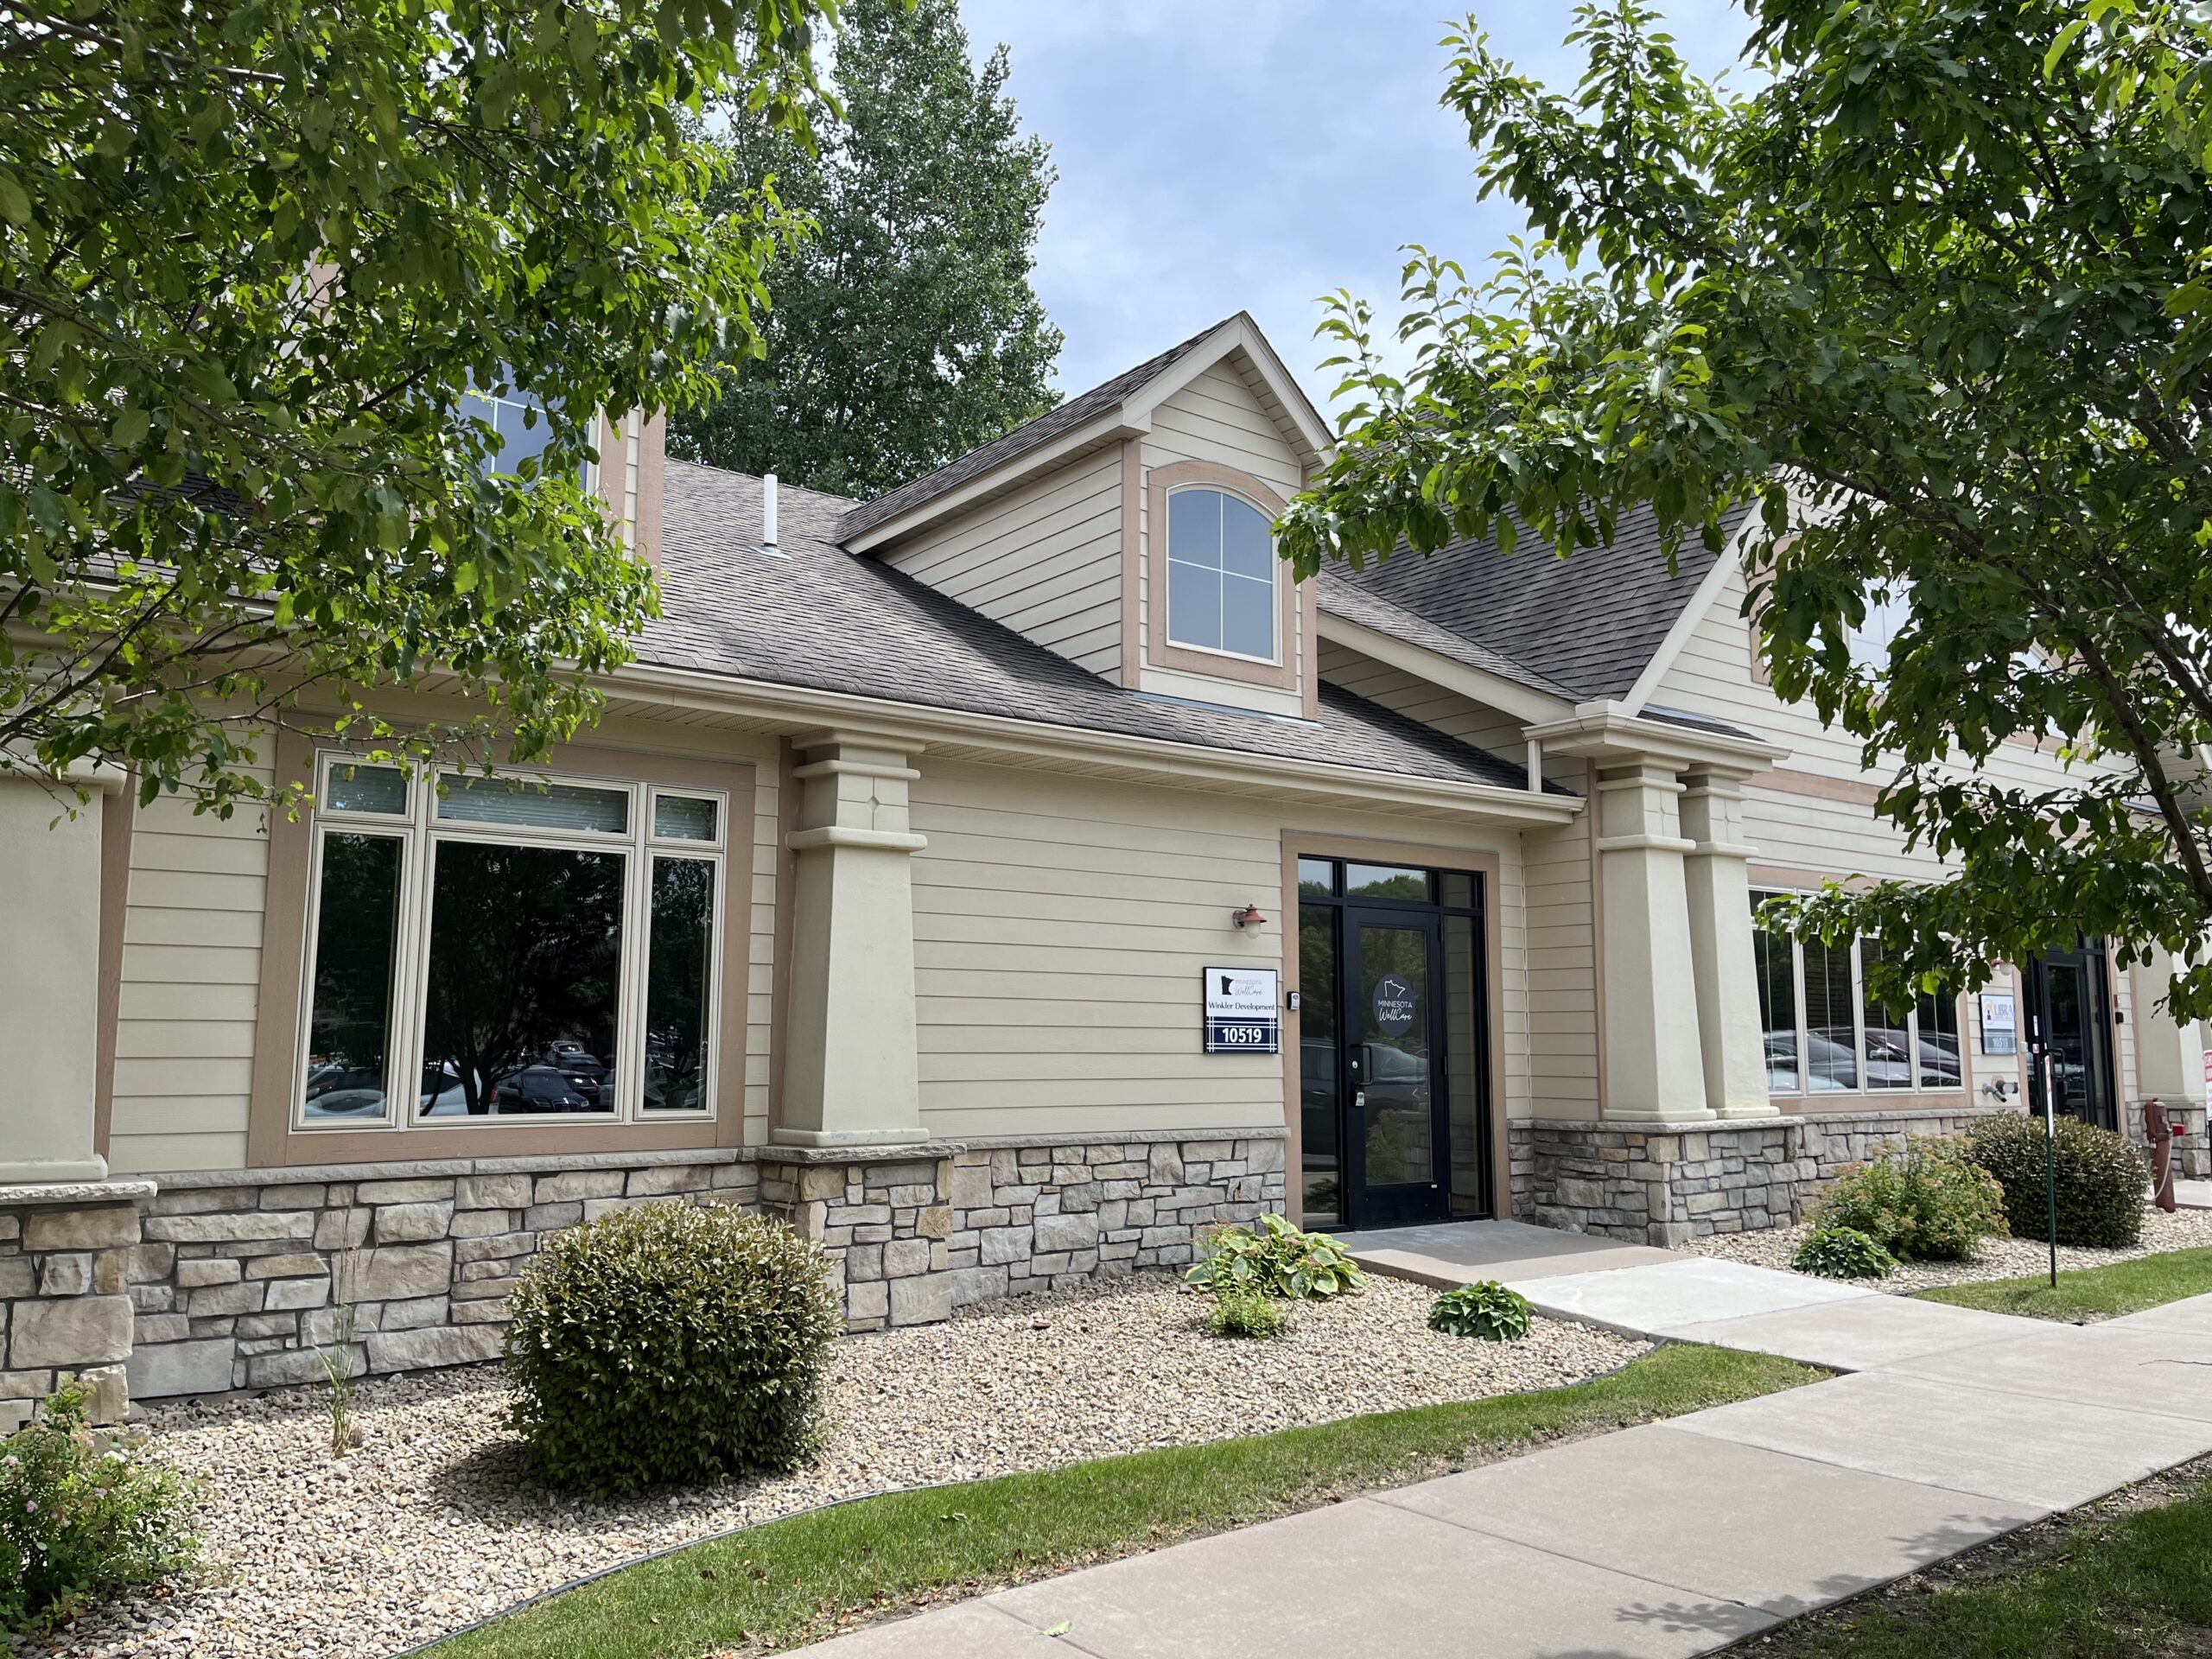 lakeville town offices lease space